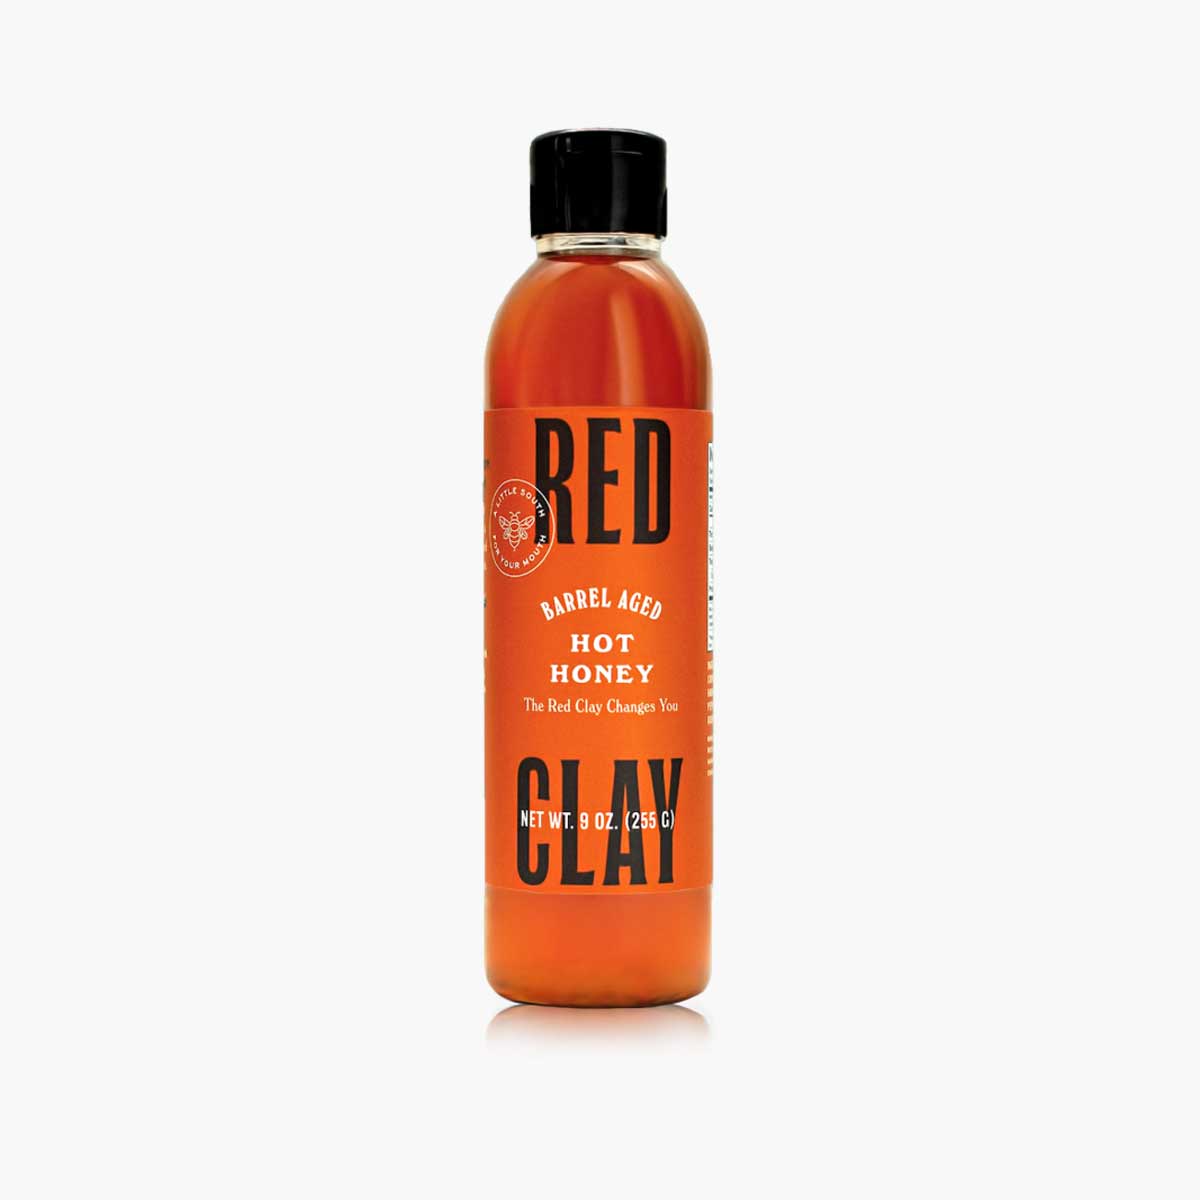 A bottle of Red Clay Hot Honey Sauce